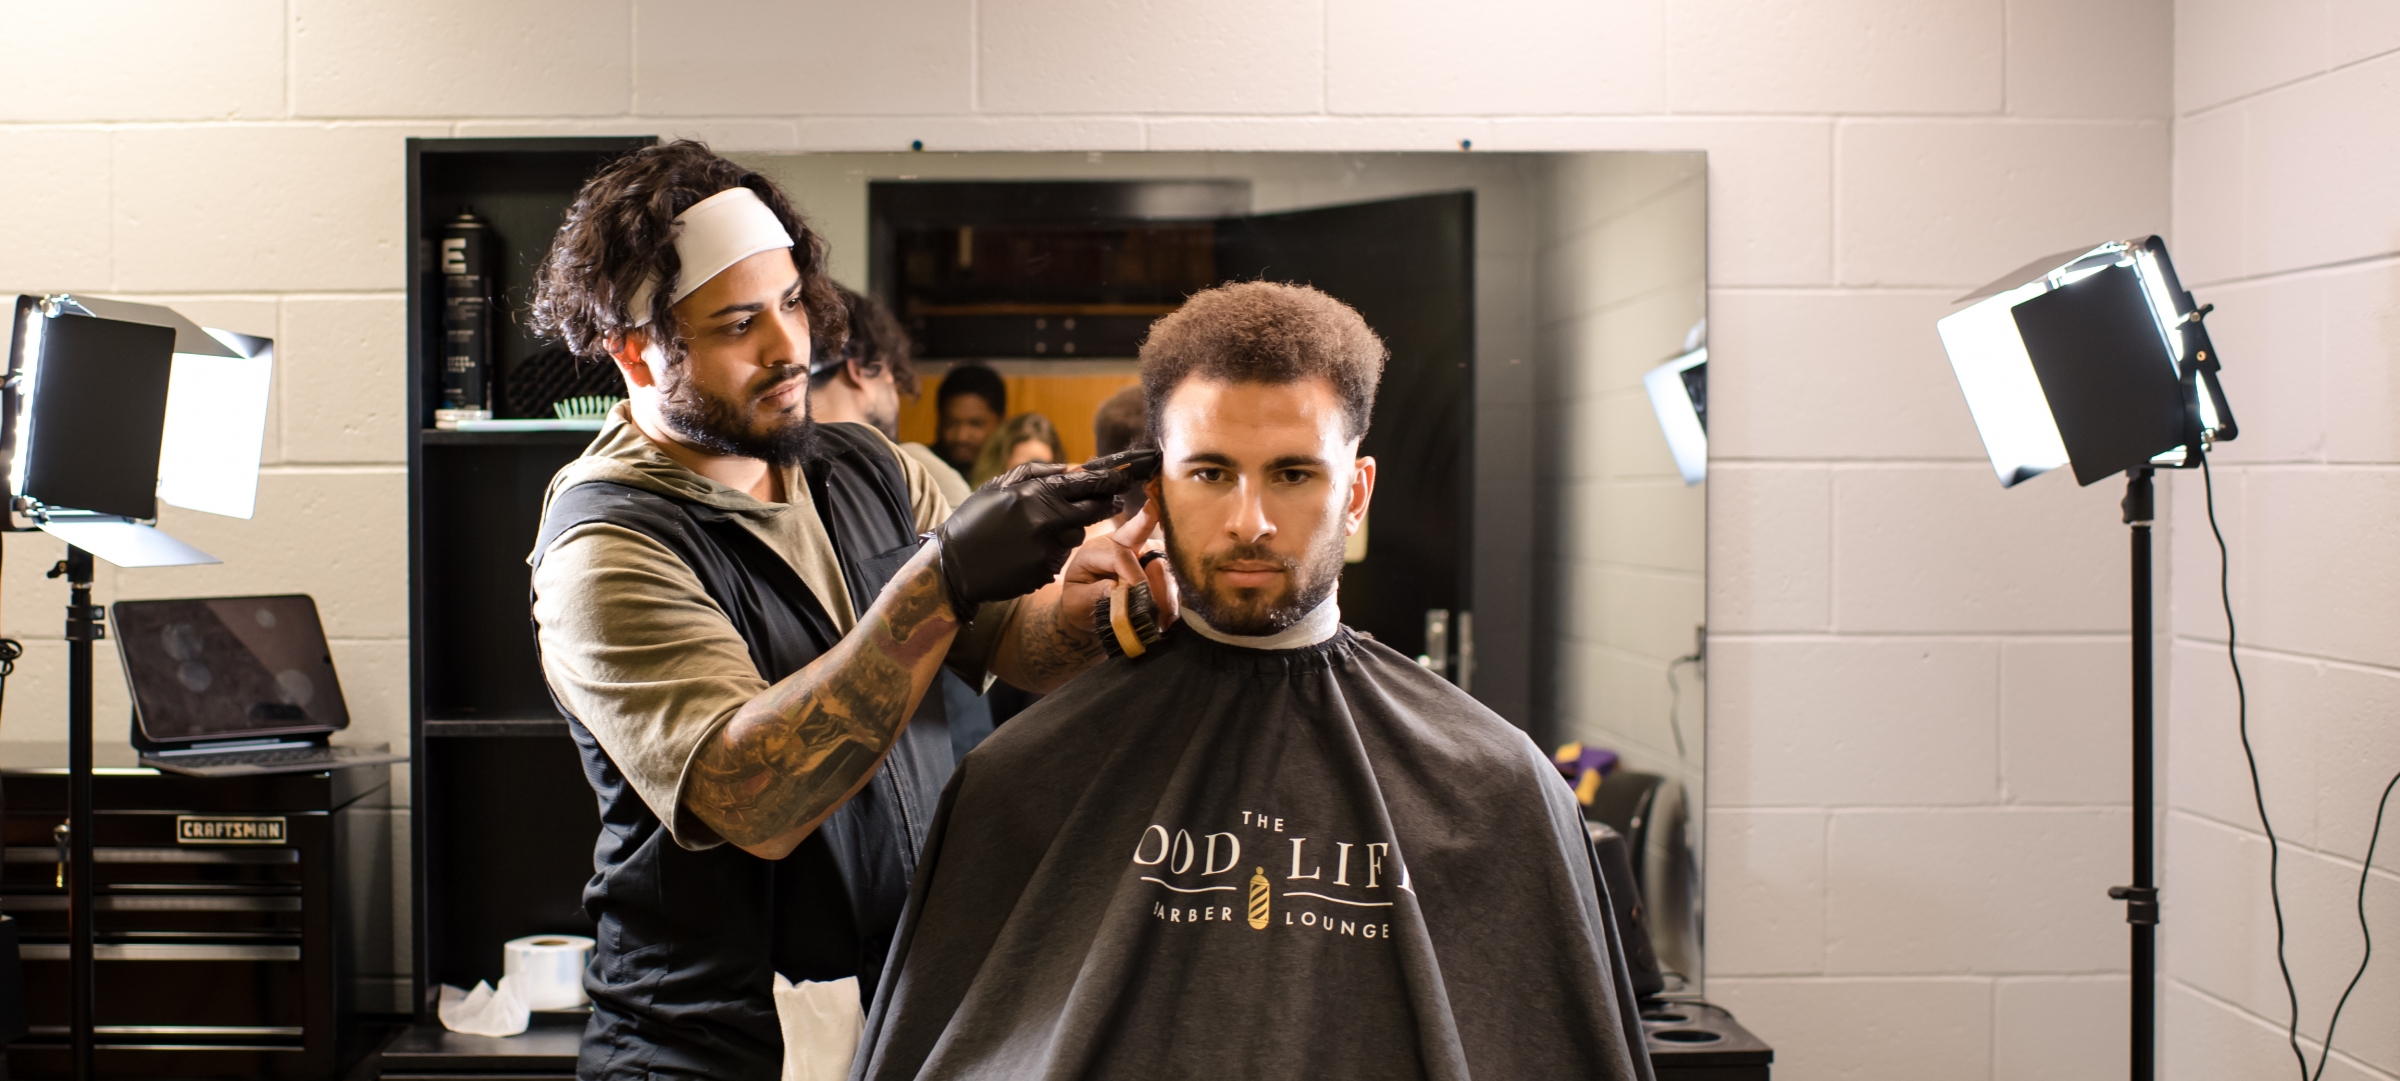 A barber cuts the hair of a non-white student with textured hair.